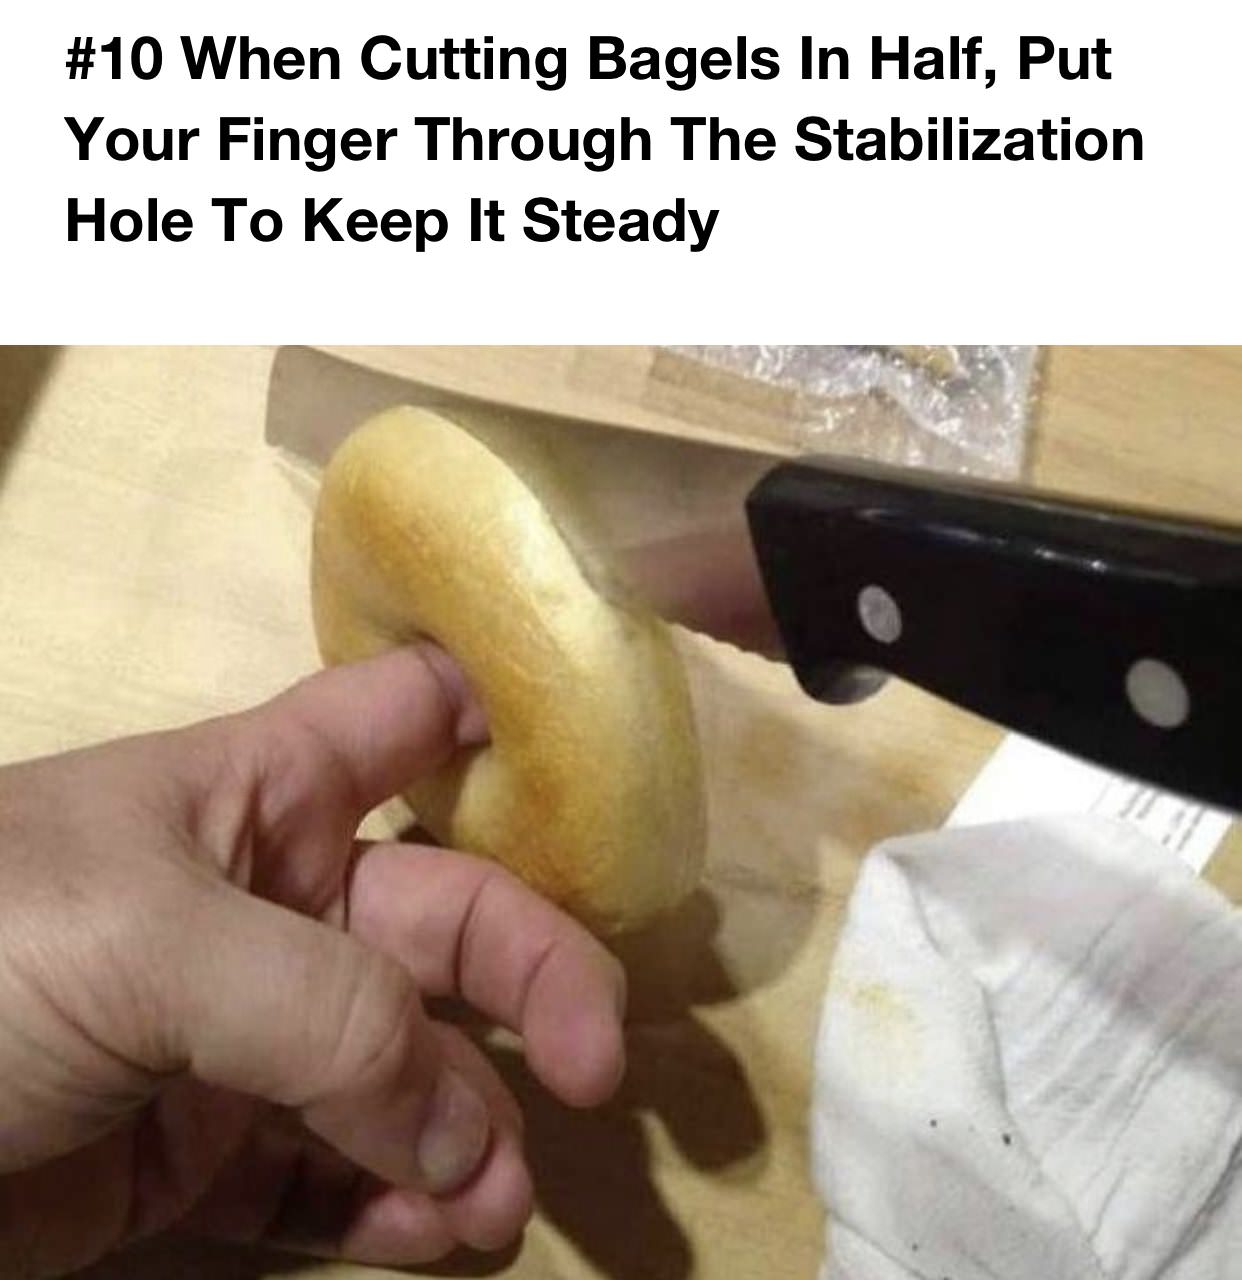 cutting bagels - When Cutting Bagels In Half, Put Your Finger Through The Stabilization Hole To Keep It Steady